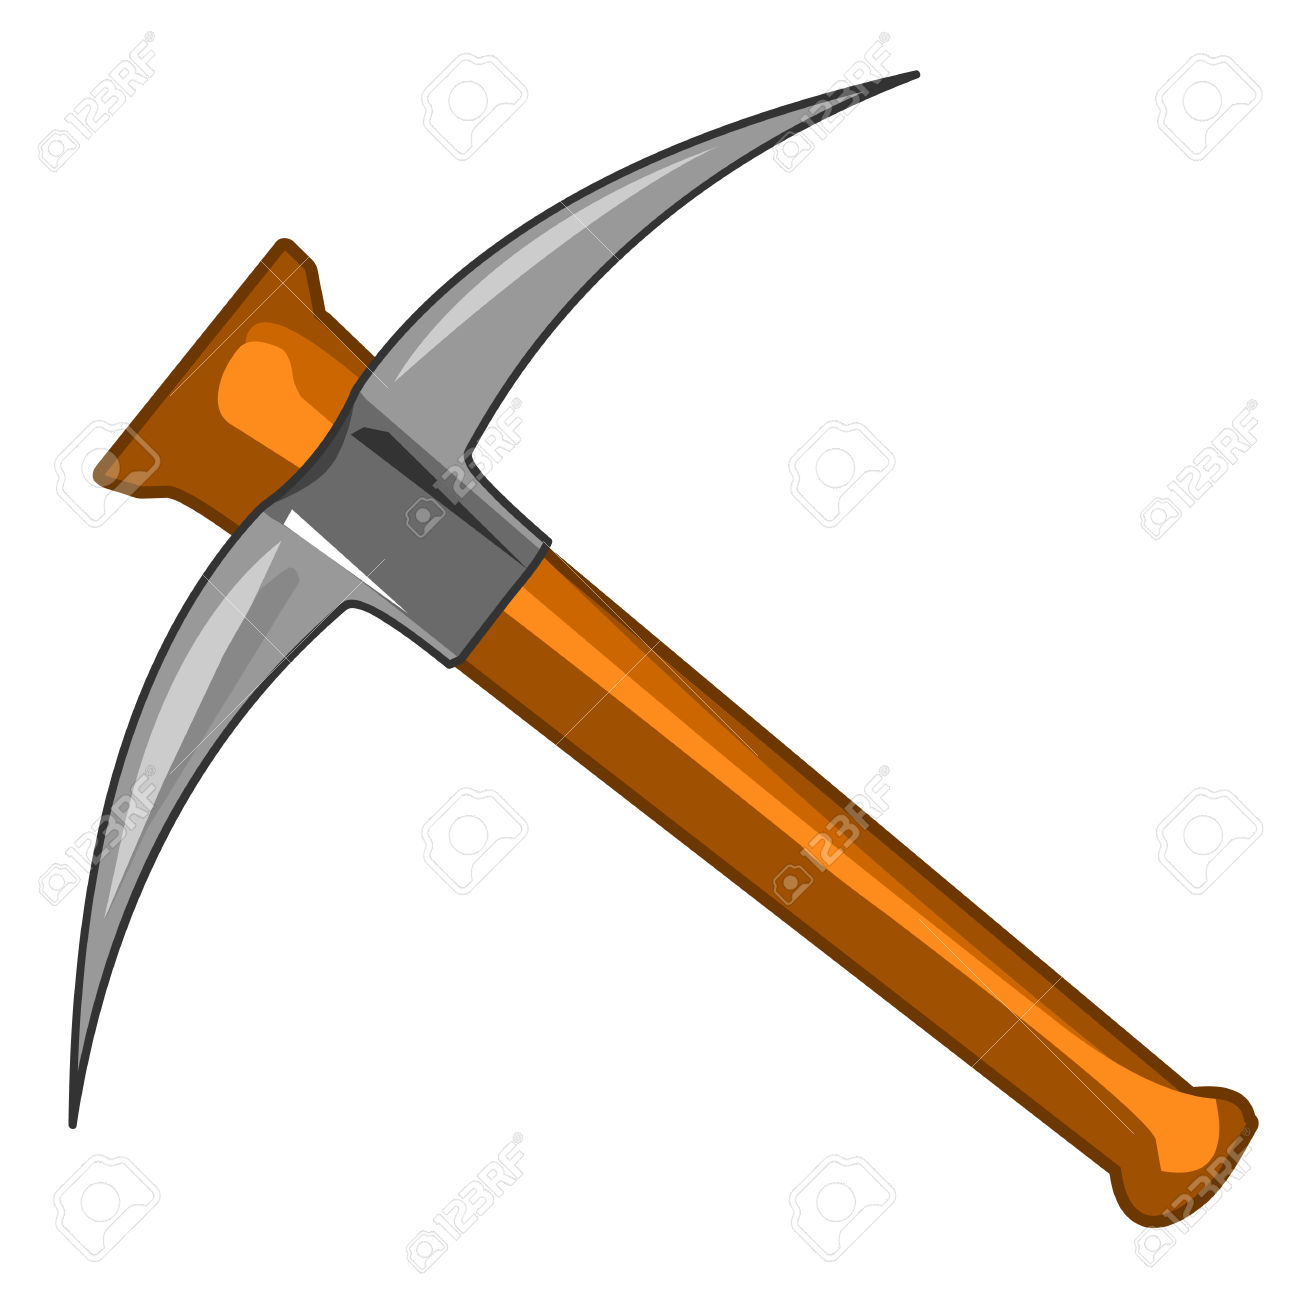 Pickaxe at getdrawings com. Axe clipart silhouette